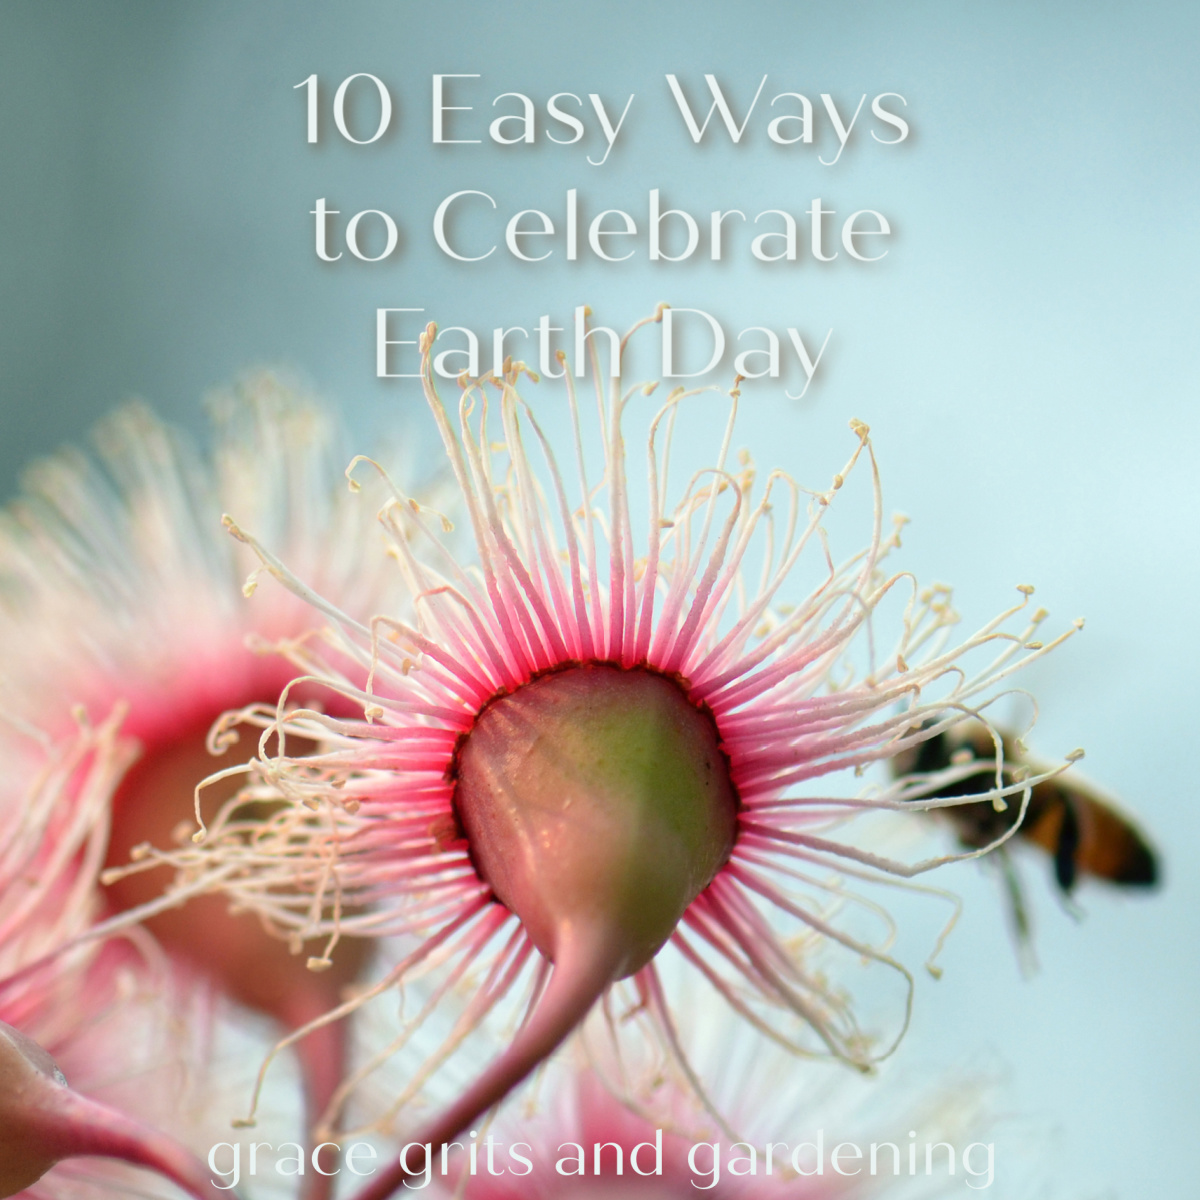 10 Easy Ways to Celebrate Earth Day